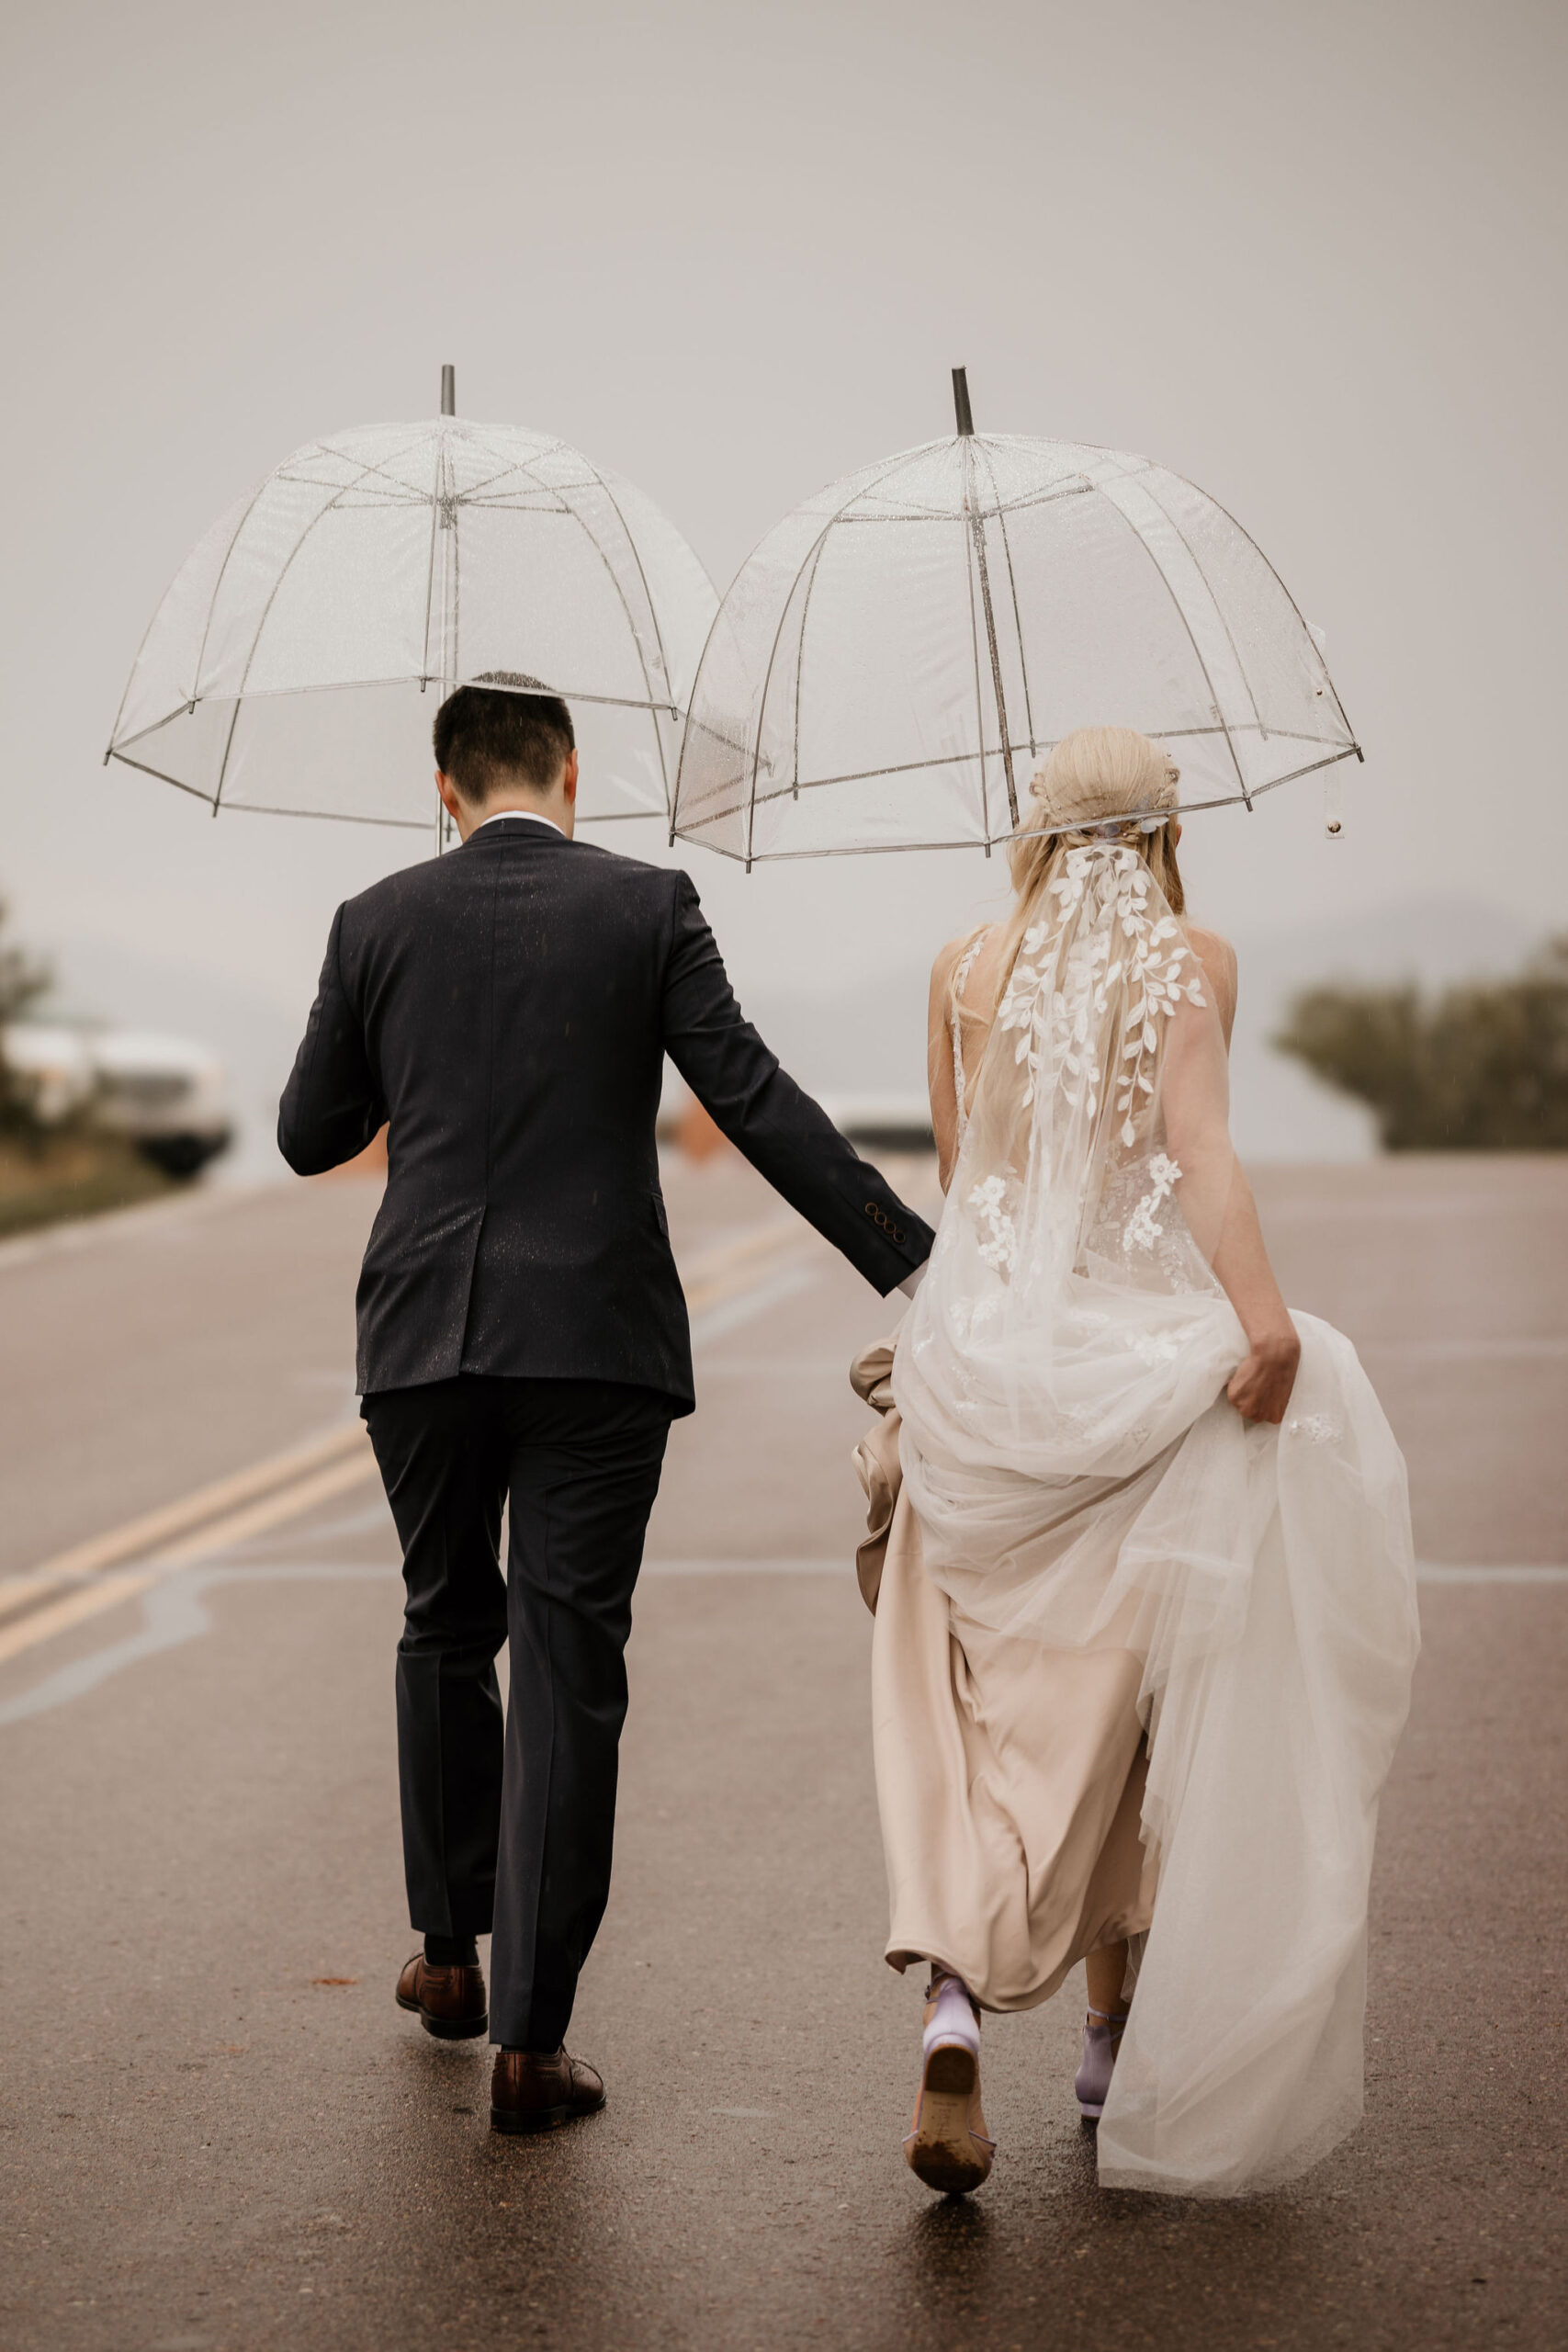 bride and groom hold umbrellas and run down road after canceling their wedding to elope.